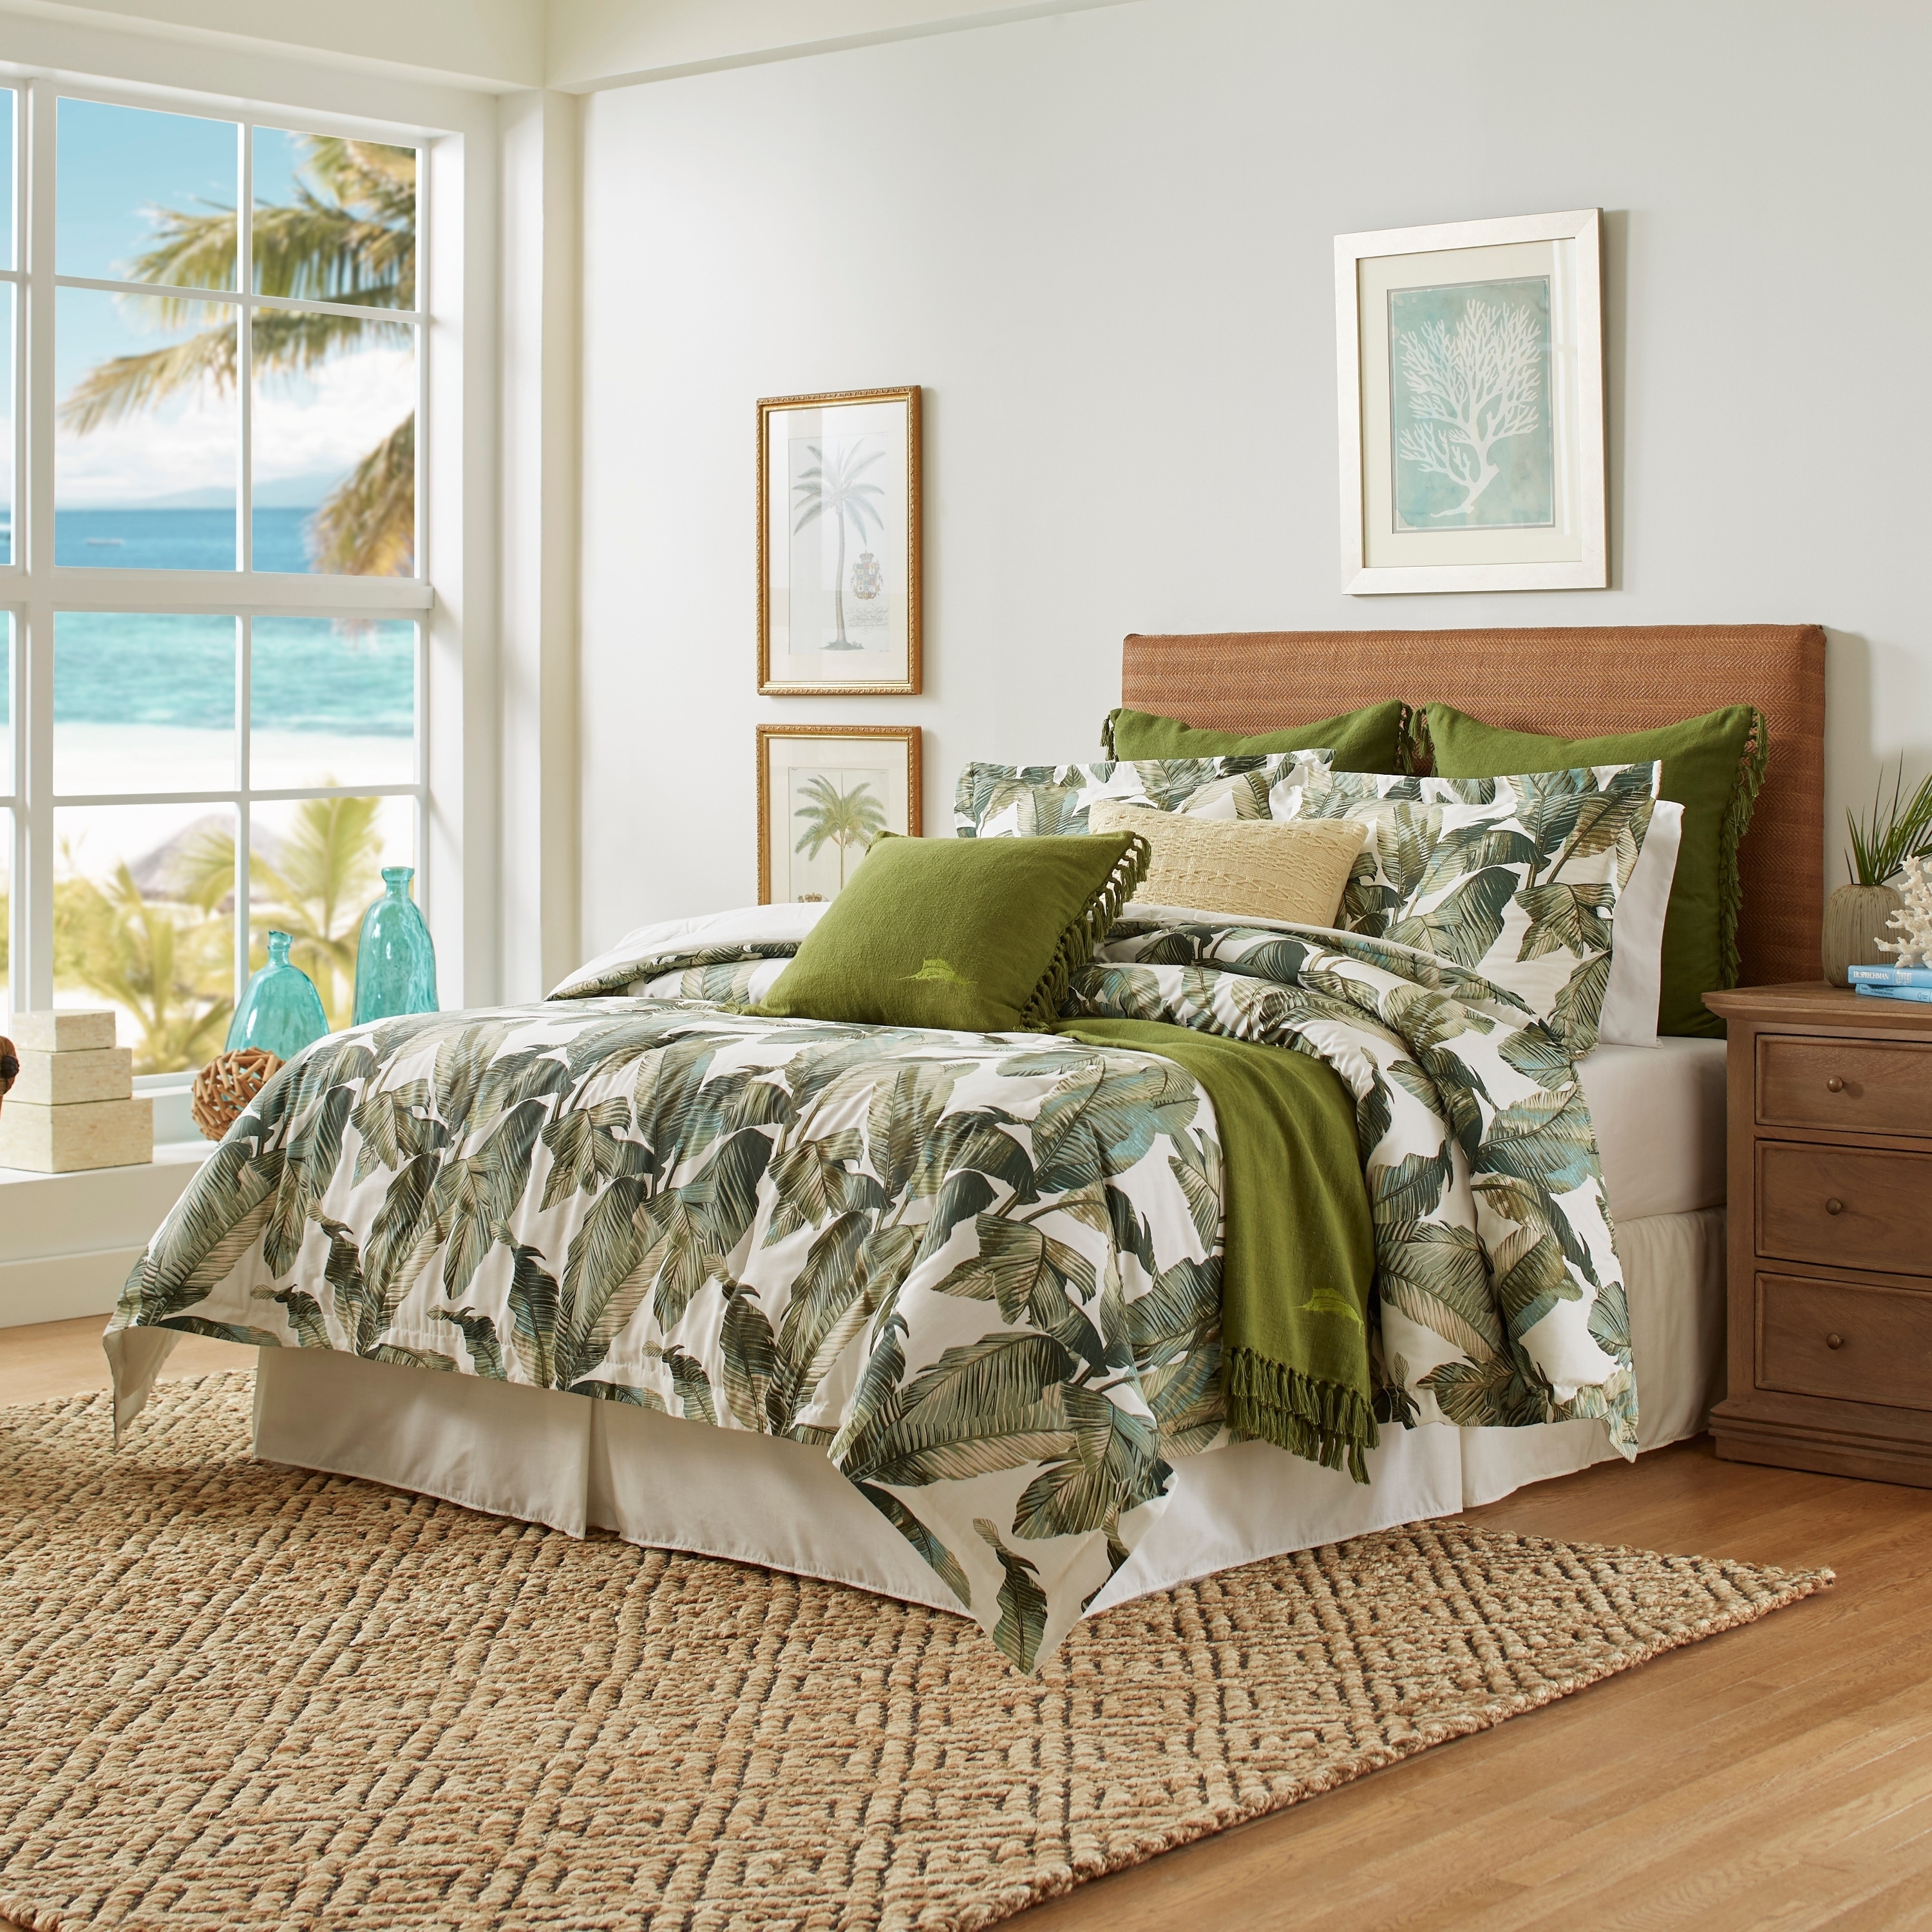 tommy bahama comforter bed bath and beyond